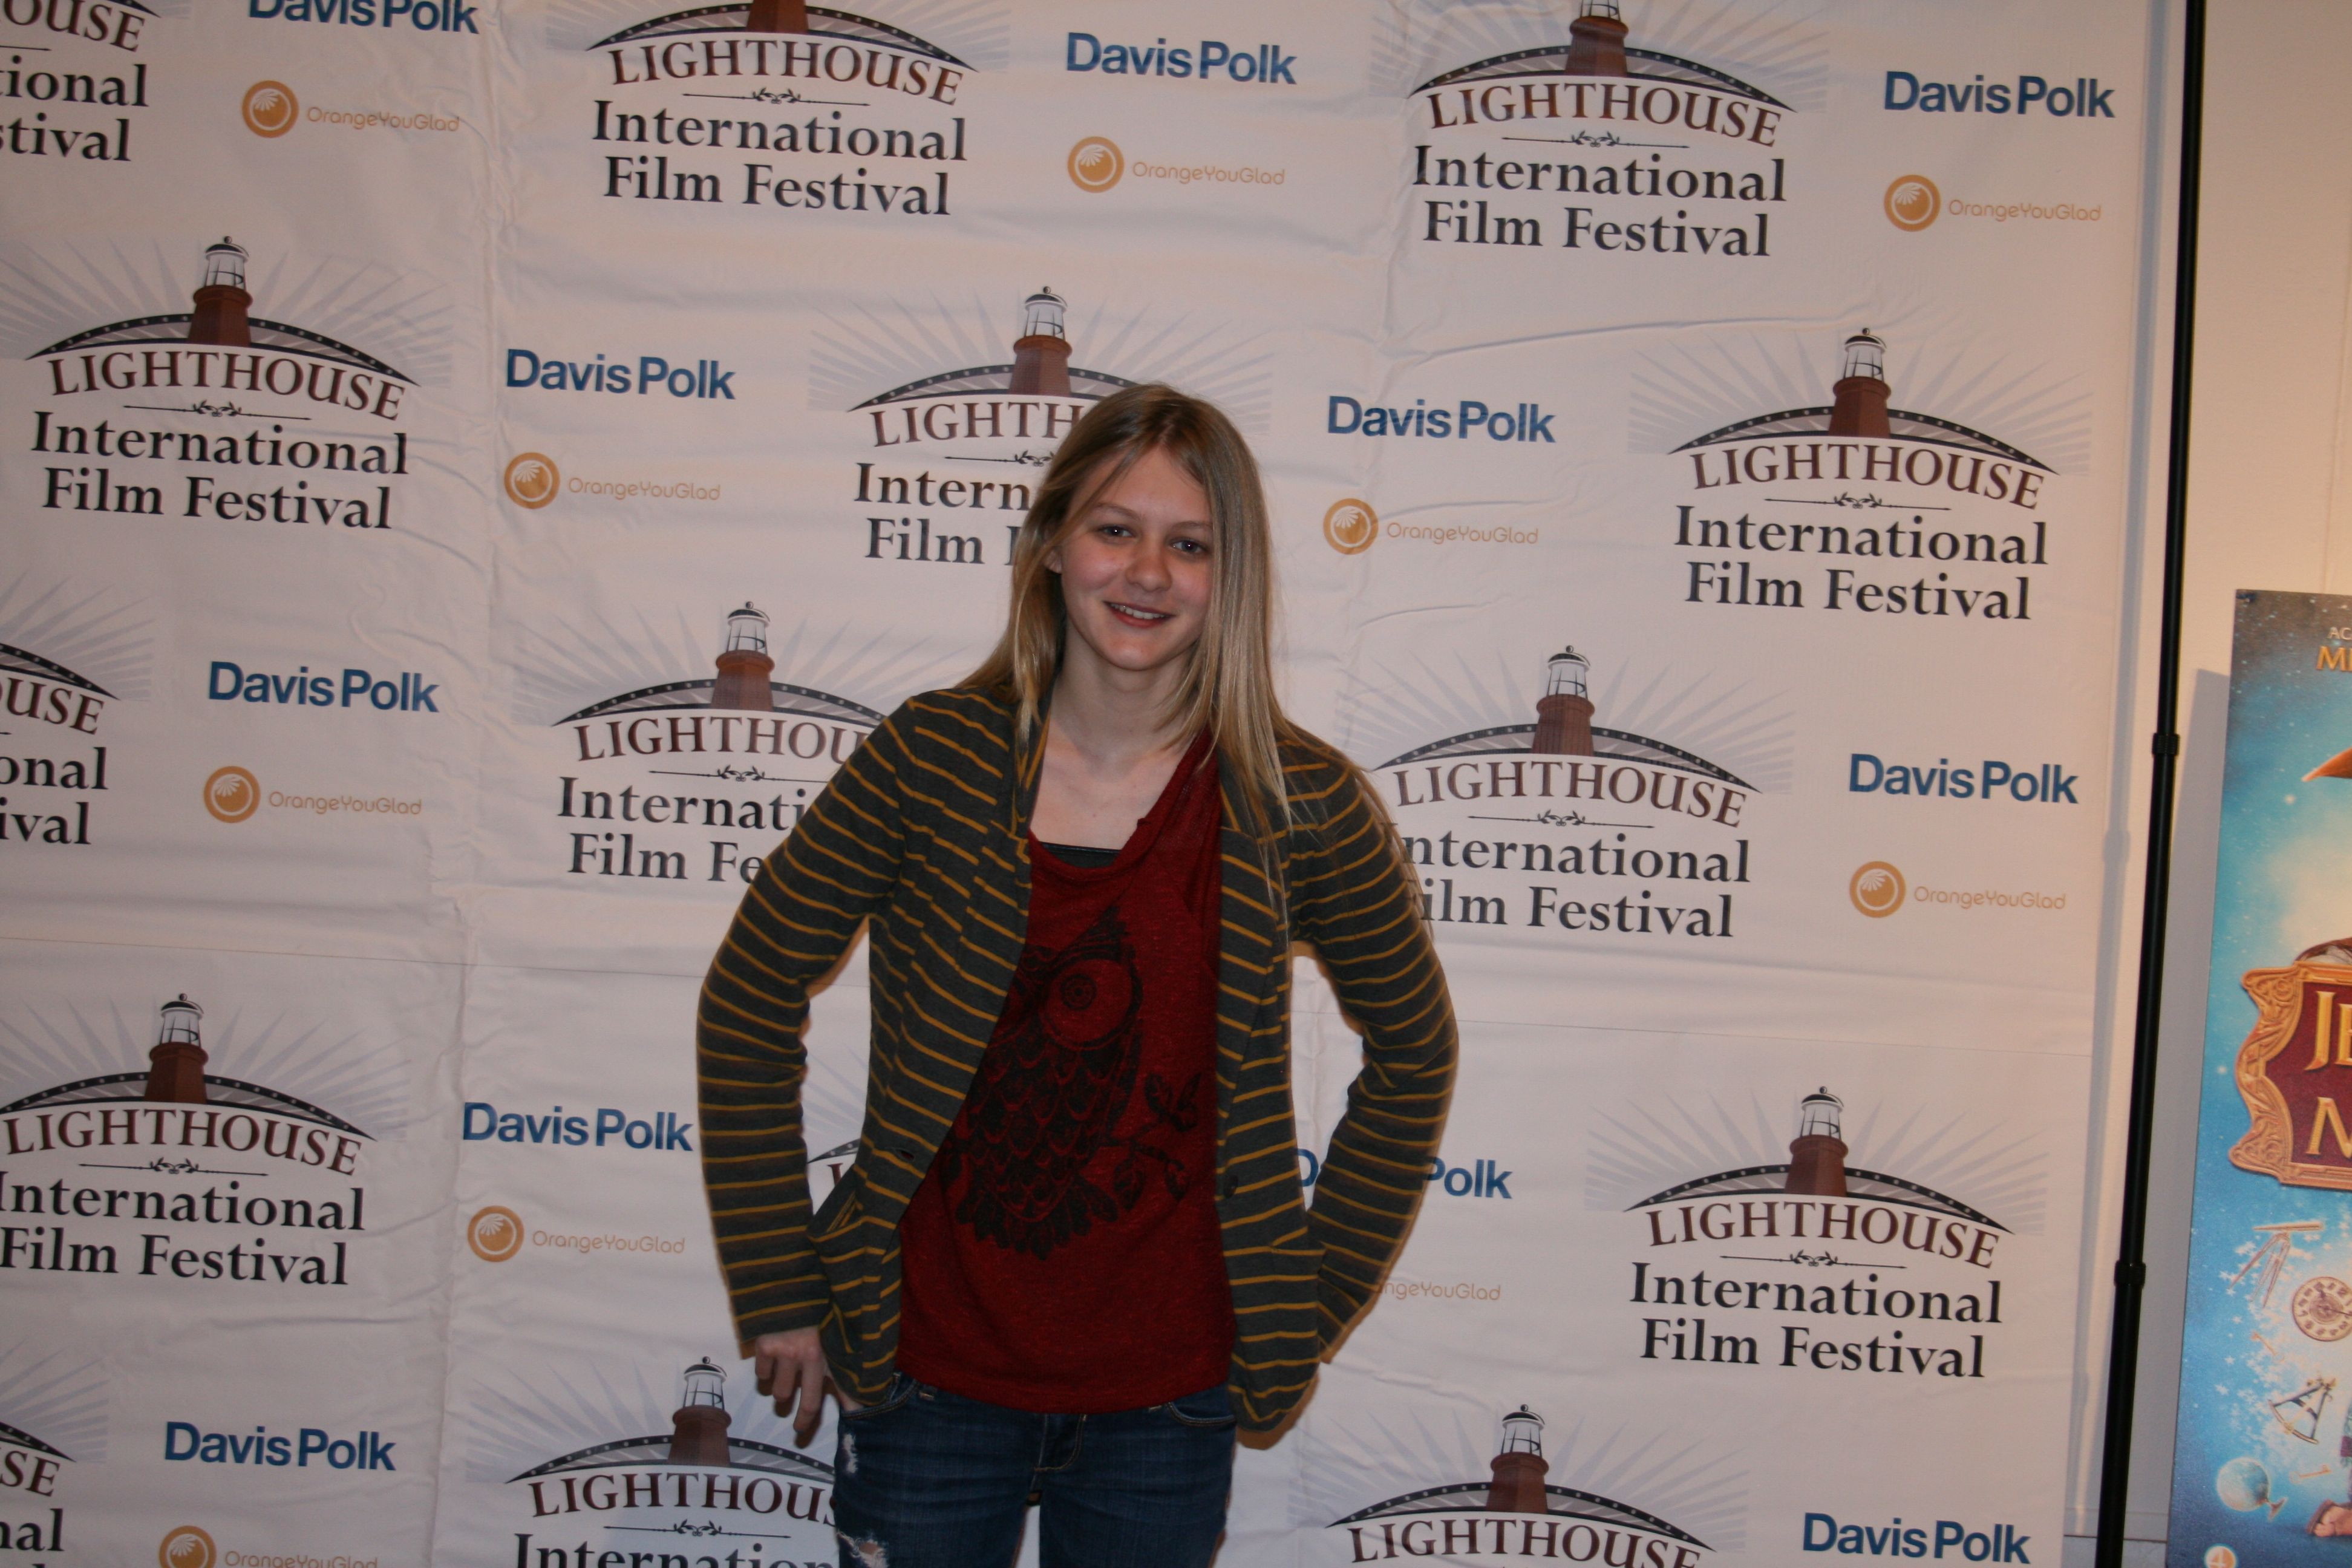 JEREMY FINK AND THE MEANING OF LIFE at the Lighthouse International Film Festival in Long Beach Island, NJ